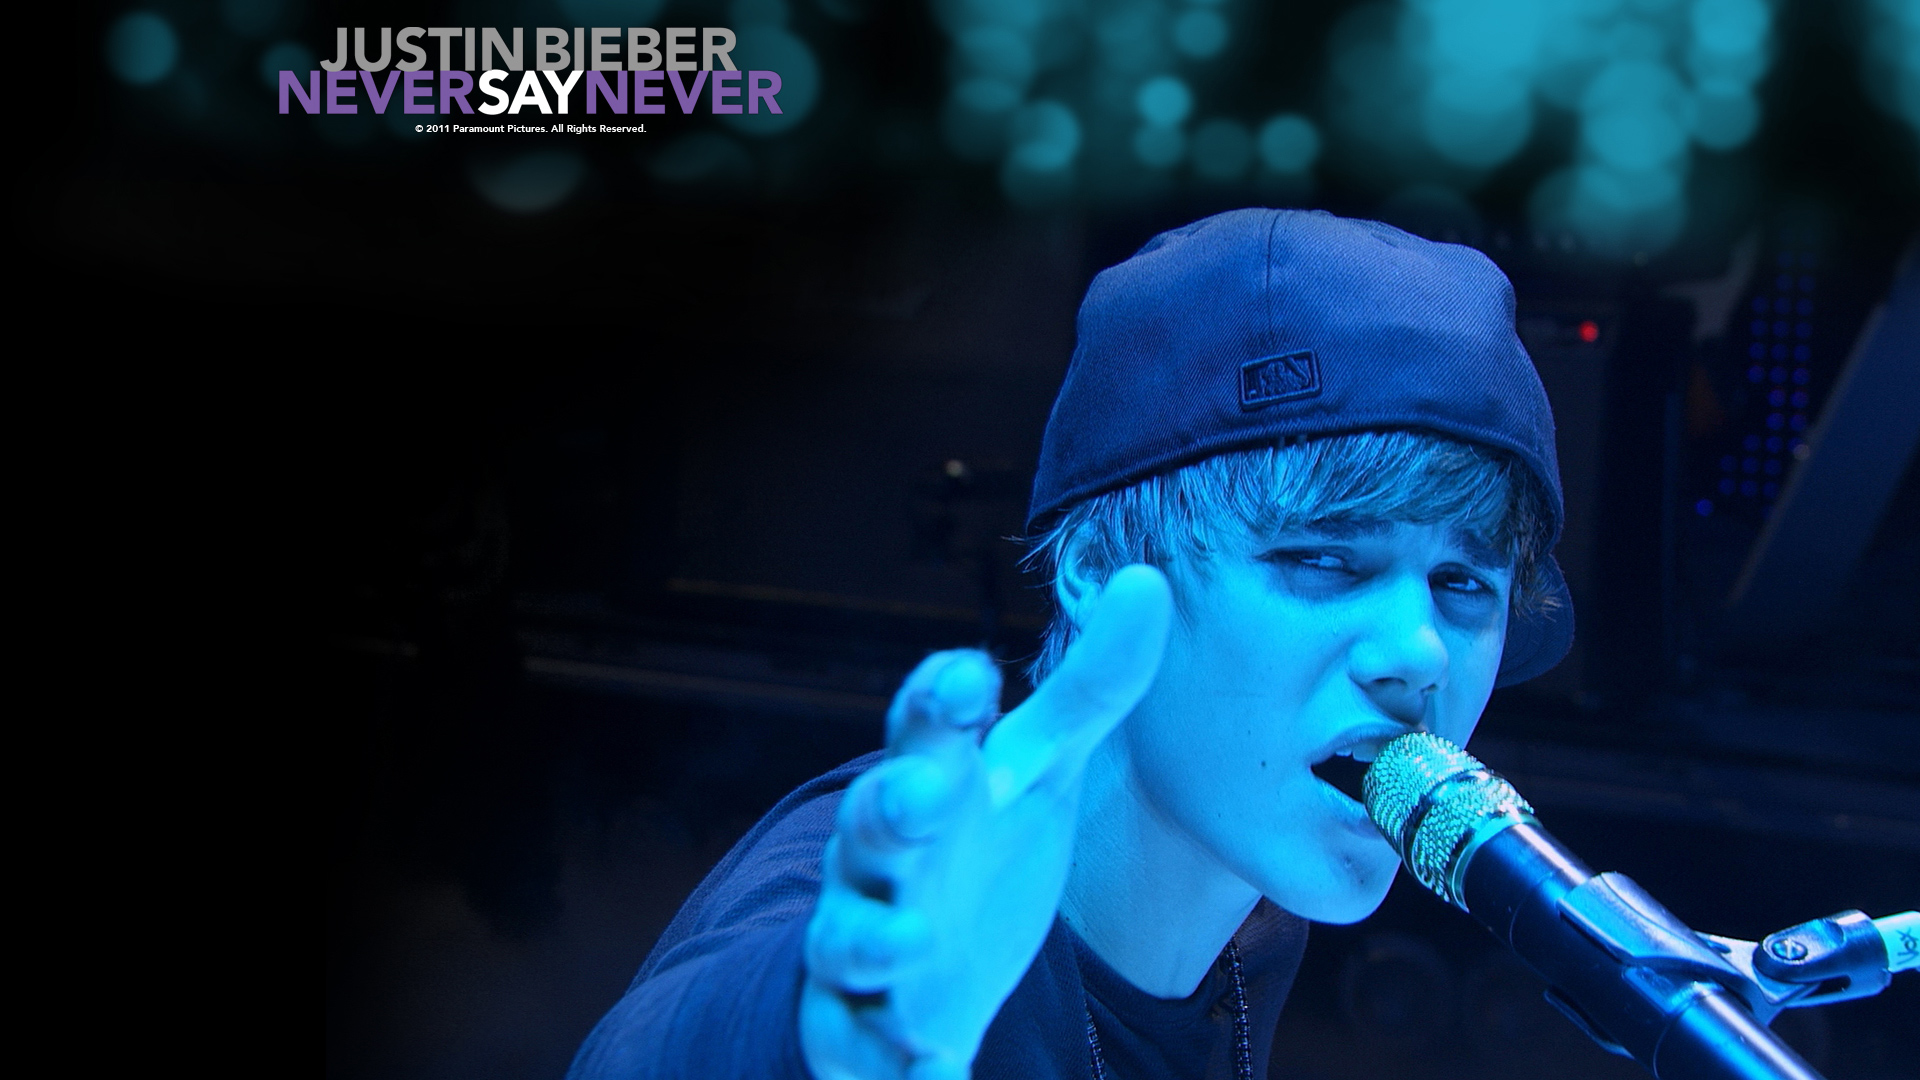 Justin Bieber Never Say Never Wallpapers HD Wallpapers